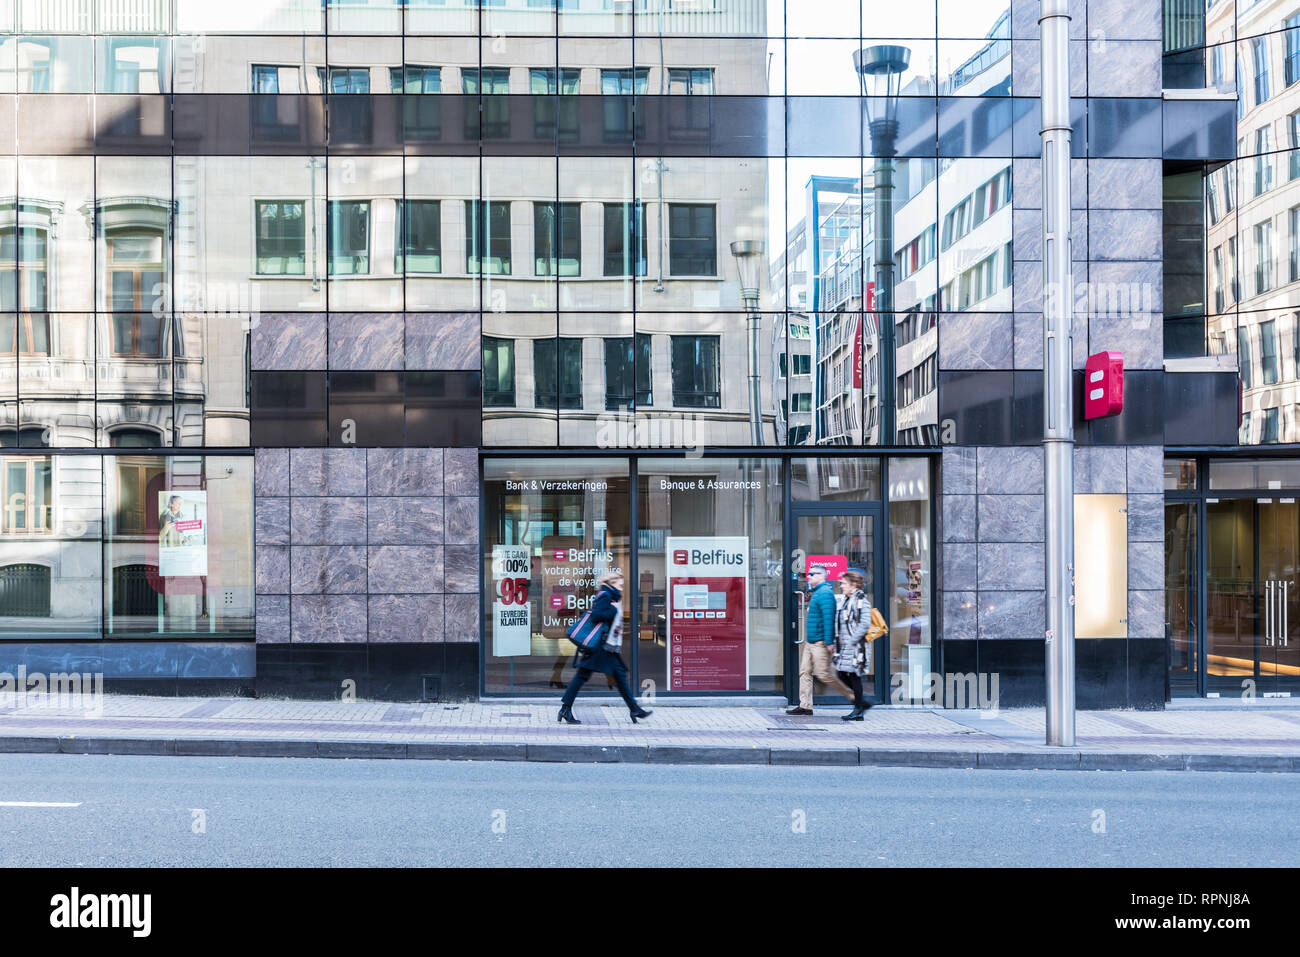 City of Brussels / Belgium - 02 15 2019: Facade of a large Belfius banking and insurance agency with steel and glass, reflecting the oppositie side of Stock Photo